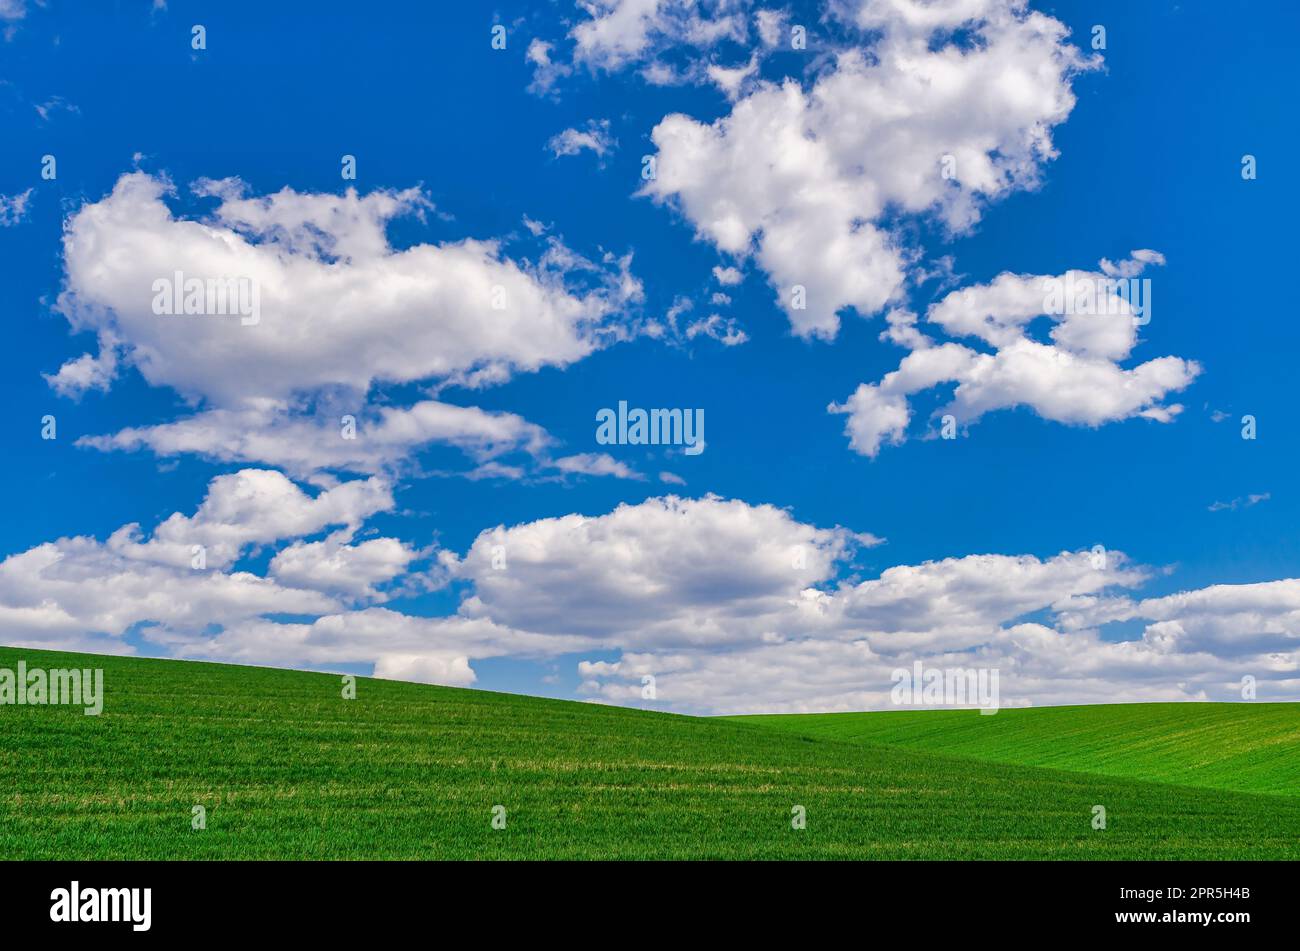 Field of green young winter crops under blue sky with clouds. Windows XP style wallpaper Stock Photo